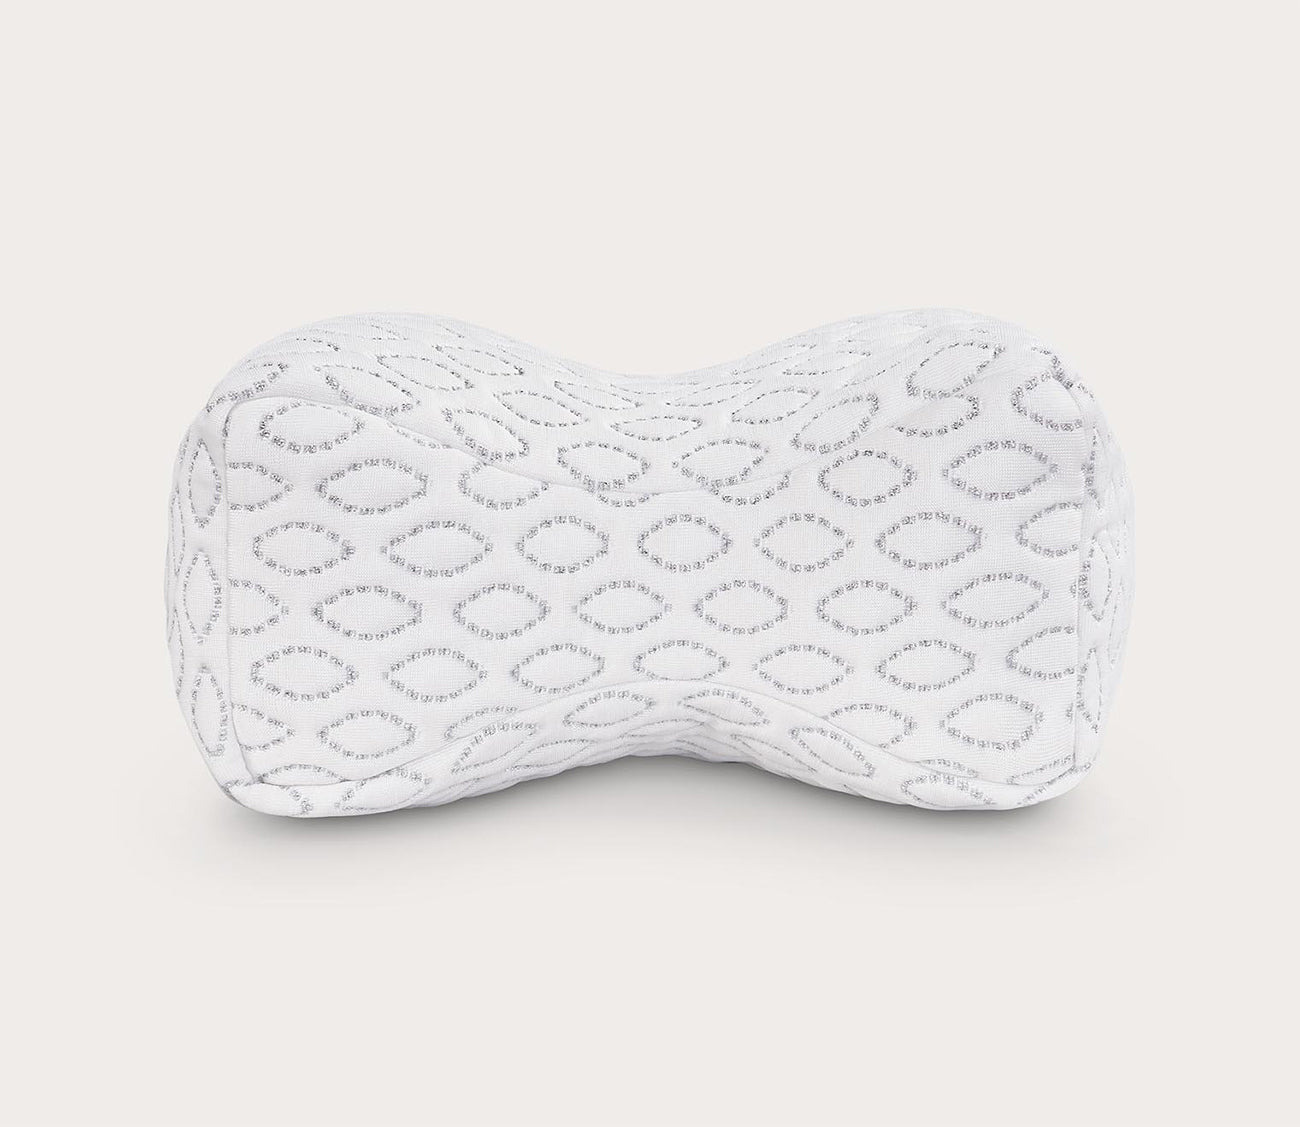 Knee Support Pillow by Bedgear